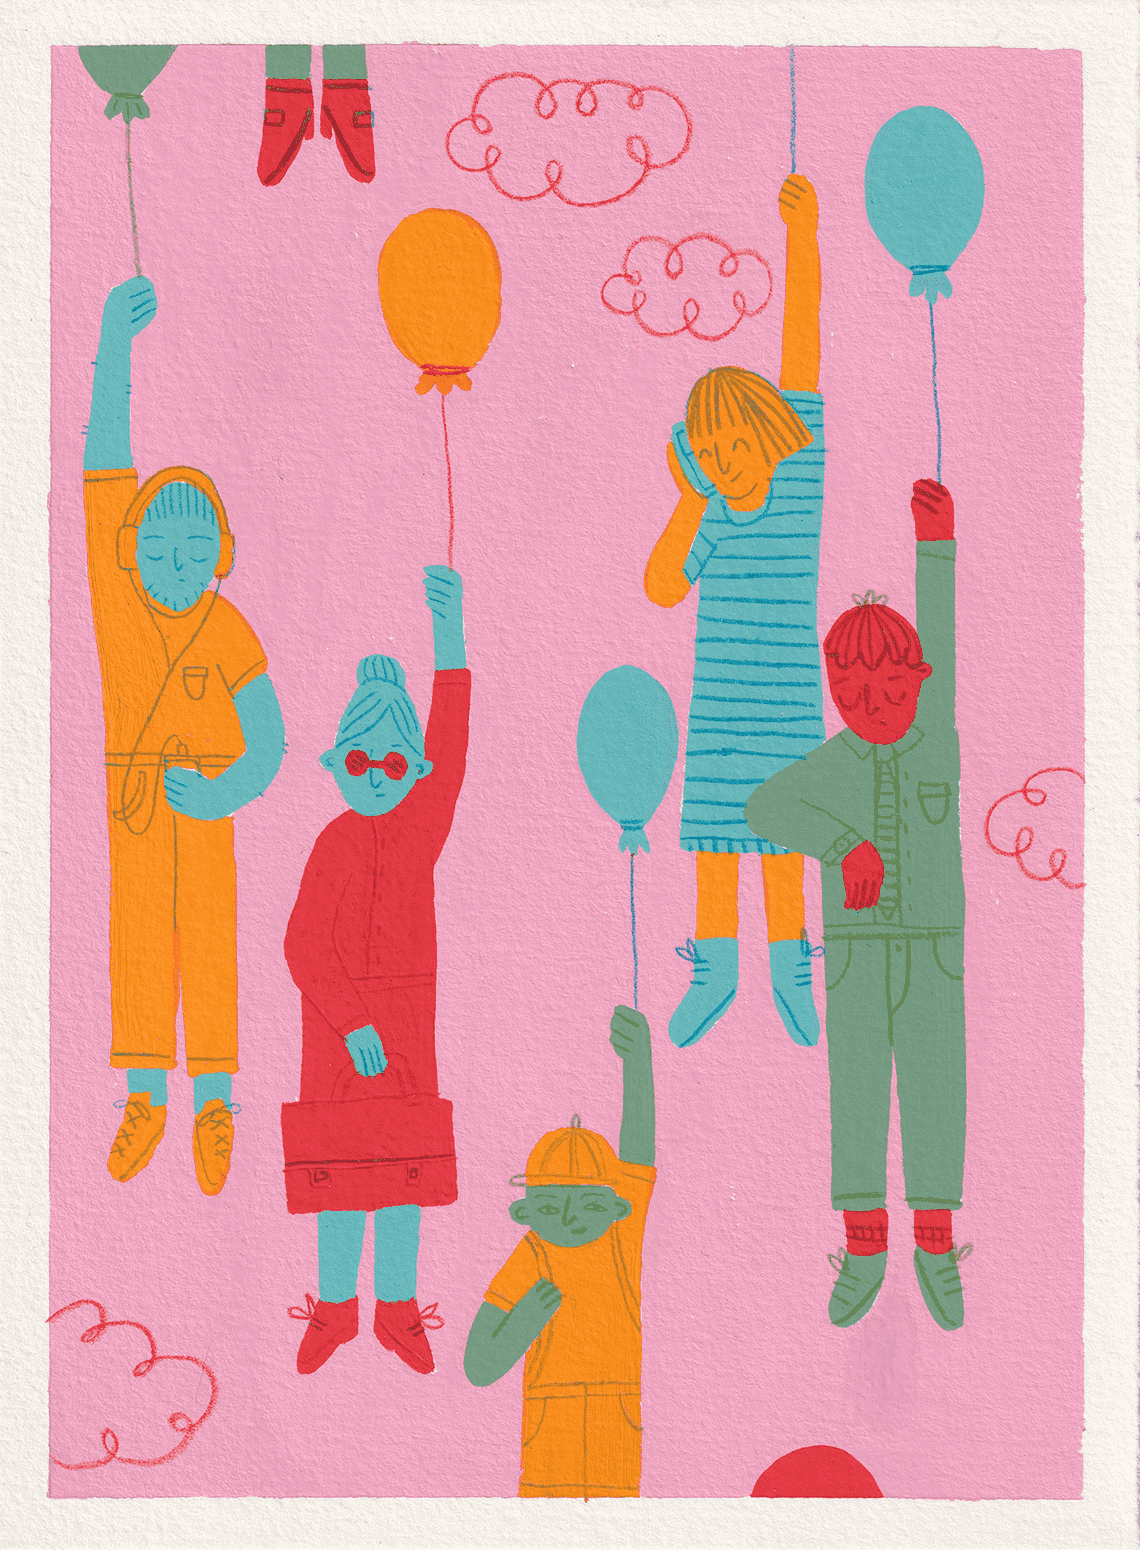 Gouache illustration of a group of people each holding onto their personal balloon.